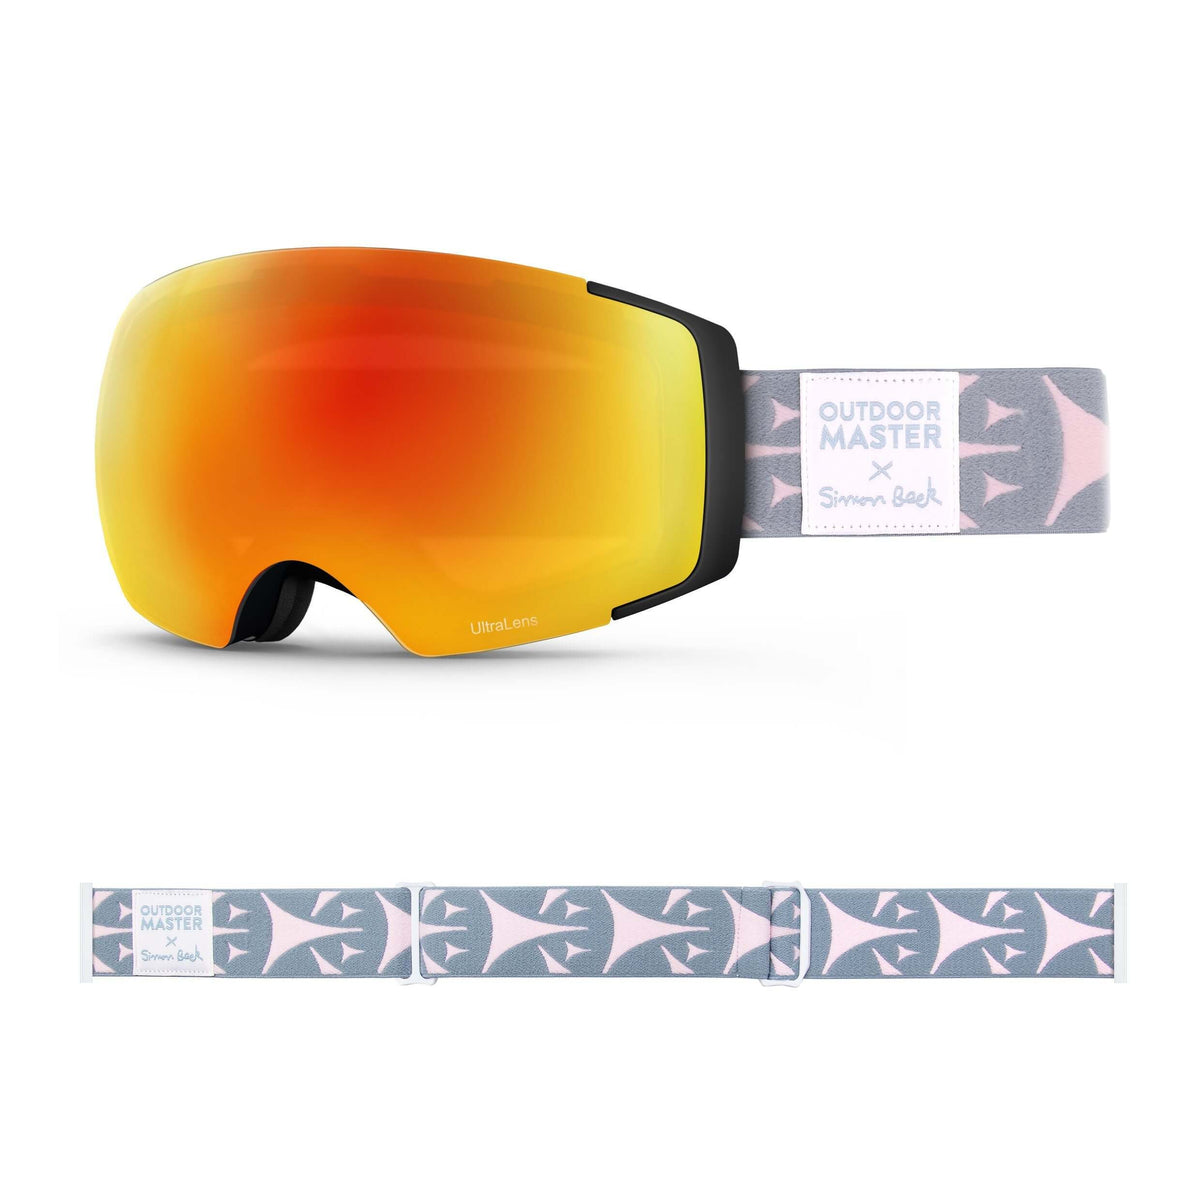 OutdoorMaster x Simon Beck Ski Goggles Pro Series - Snowshoeing Art Limited Edition OutdoorMaster UltraLens VLT 25% Optimized Orange with REVO Red Bouncy Triangles